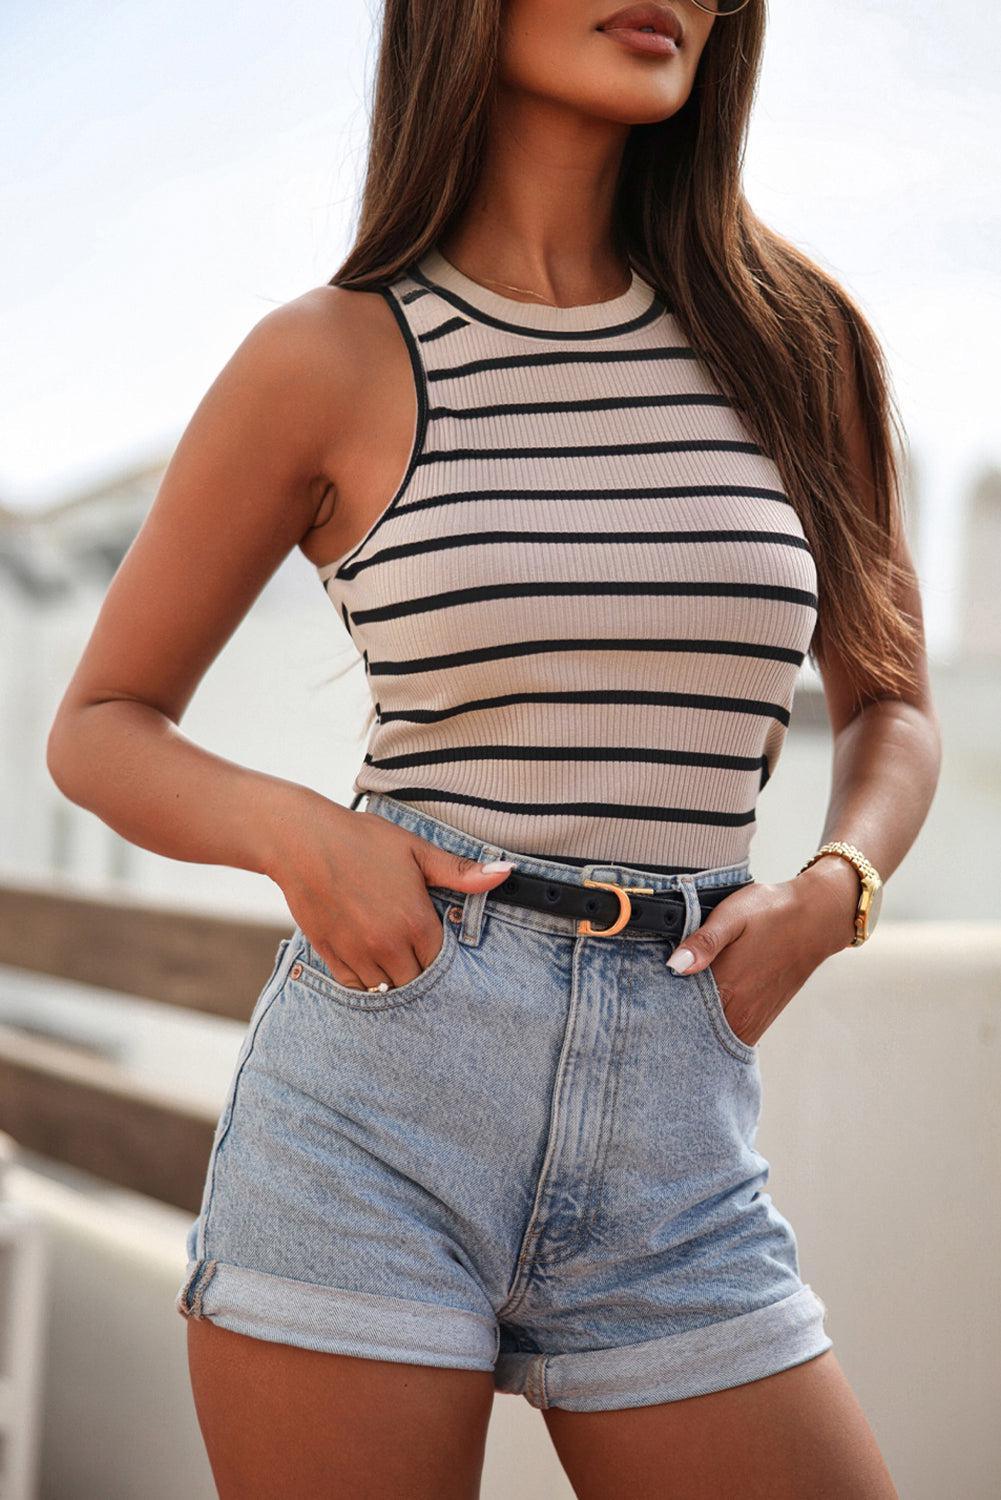 a woman wearing a striped top and denim shorts